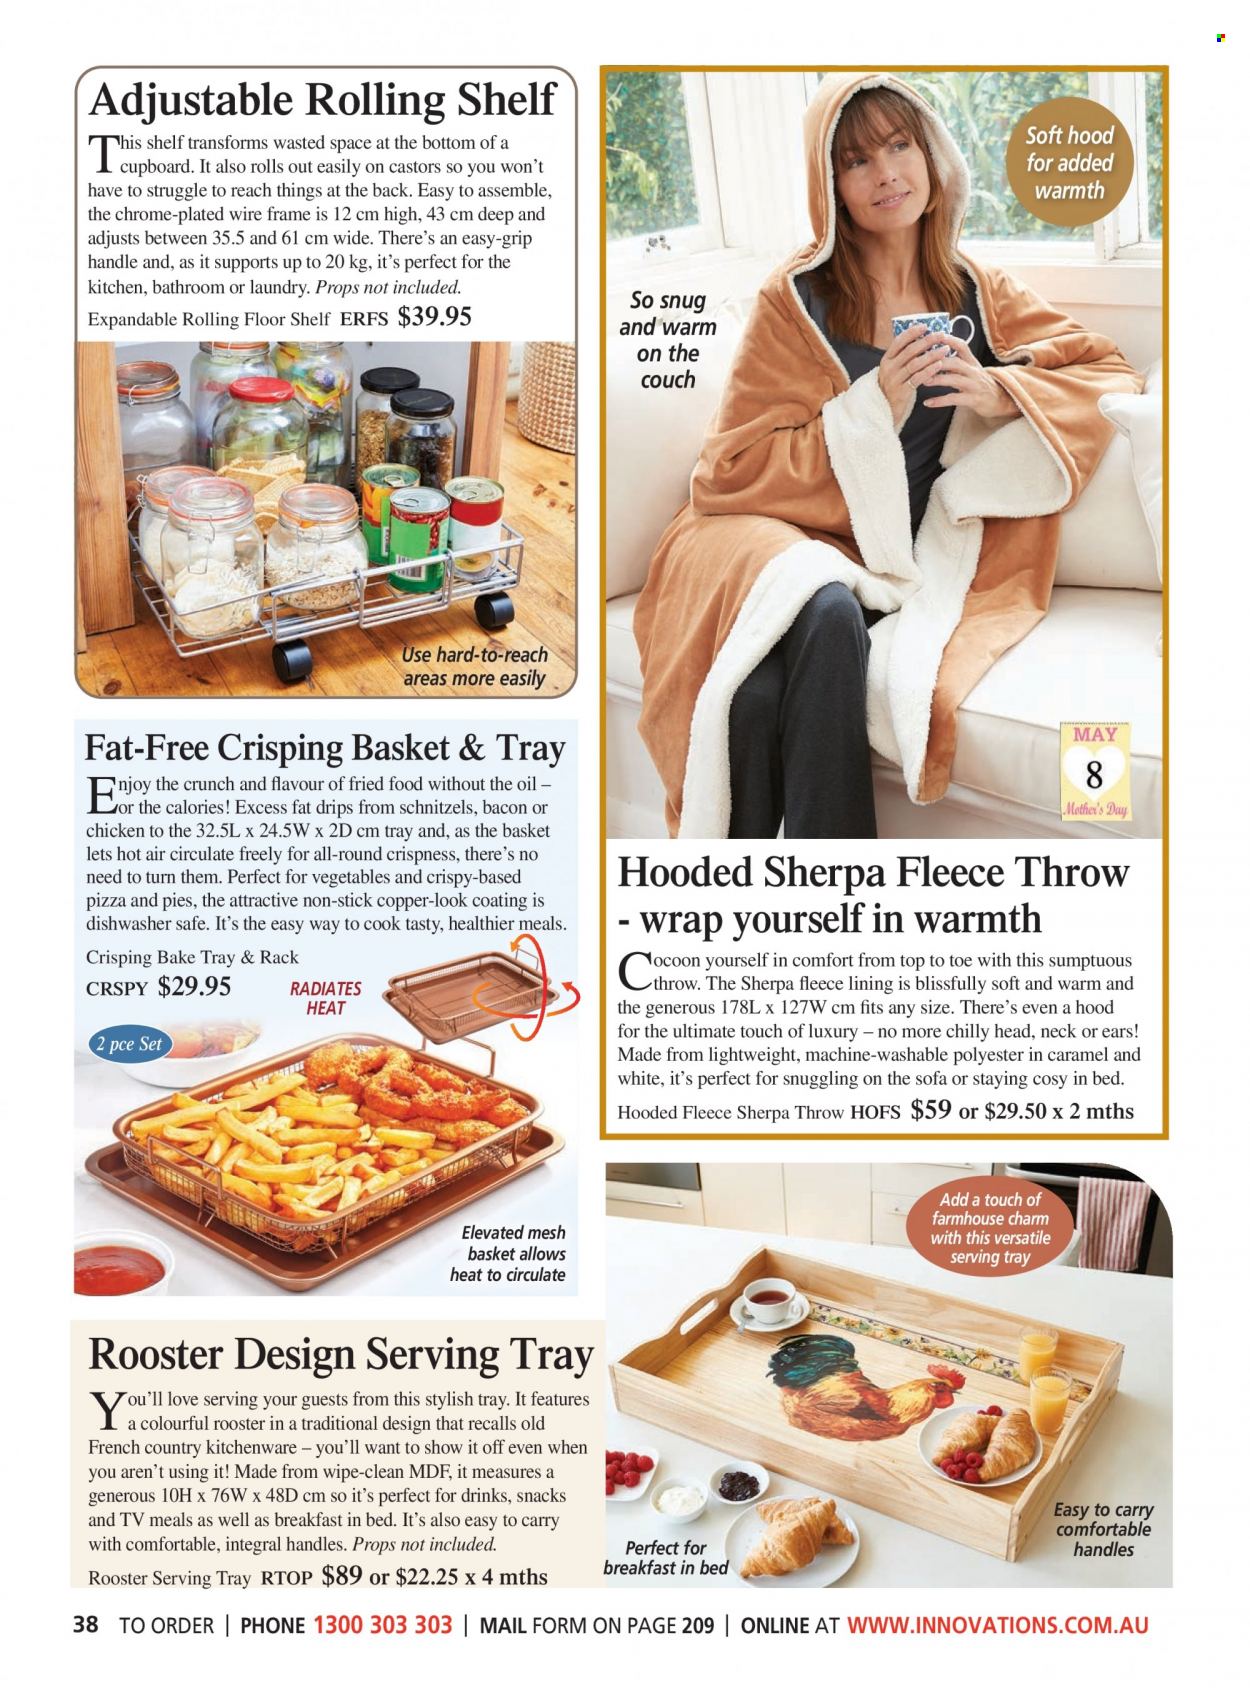 thumbnail - Innovations Catalogue - Sales products - basket, fleece throw, sherpa, Snug. Page 38.